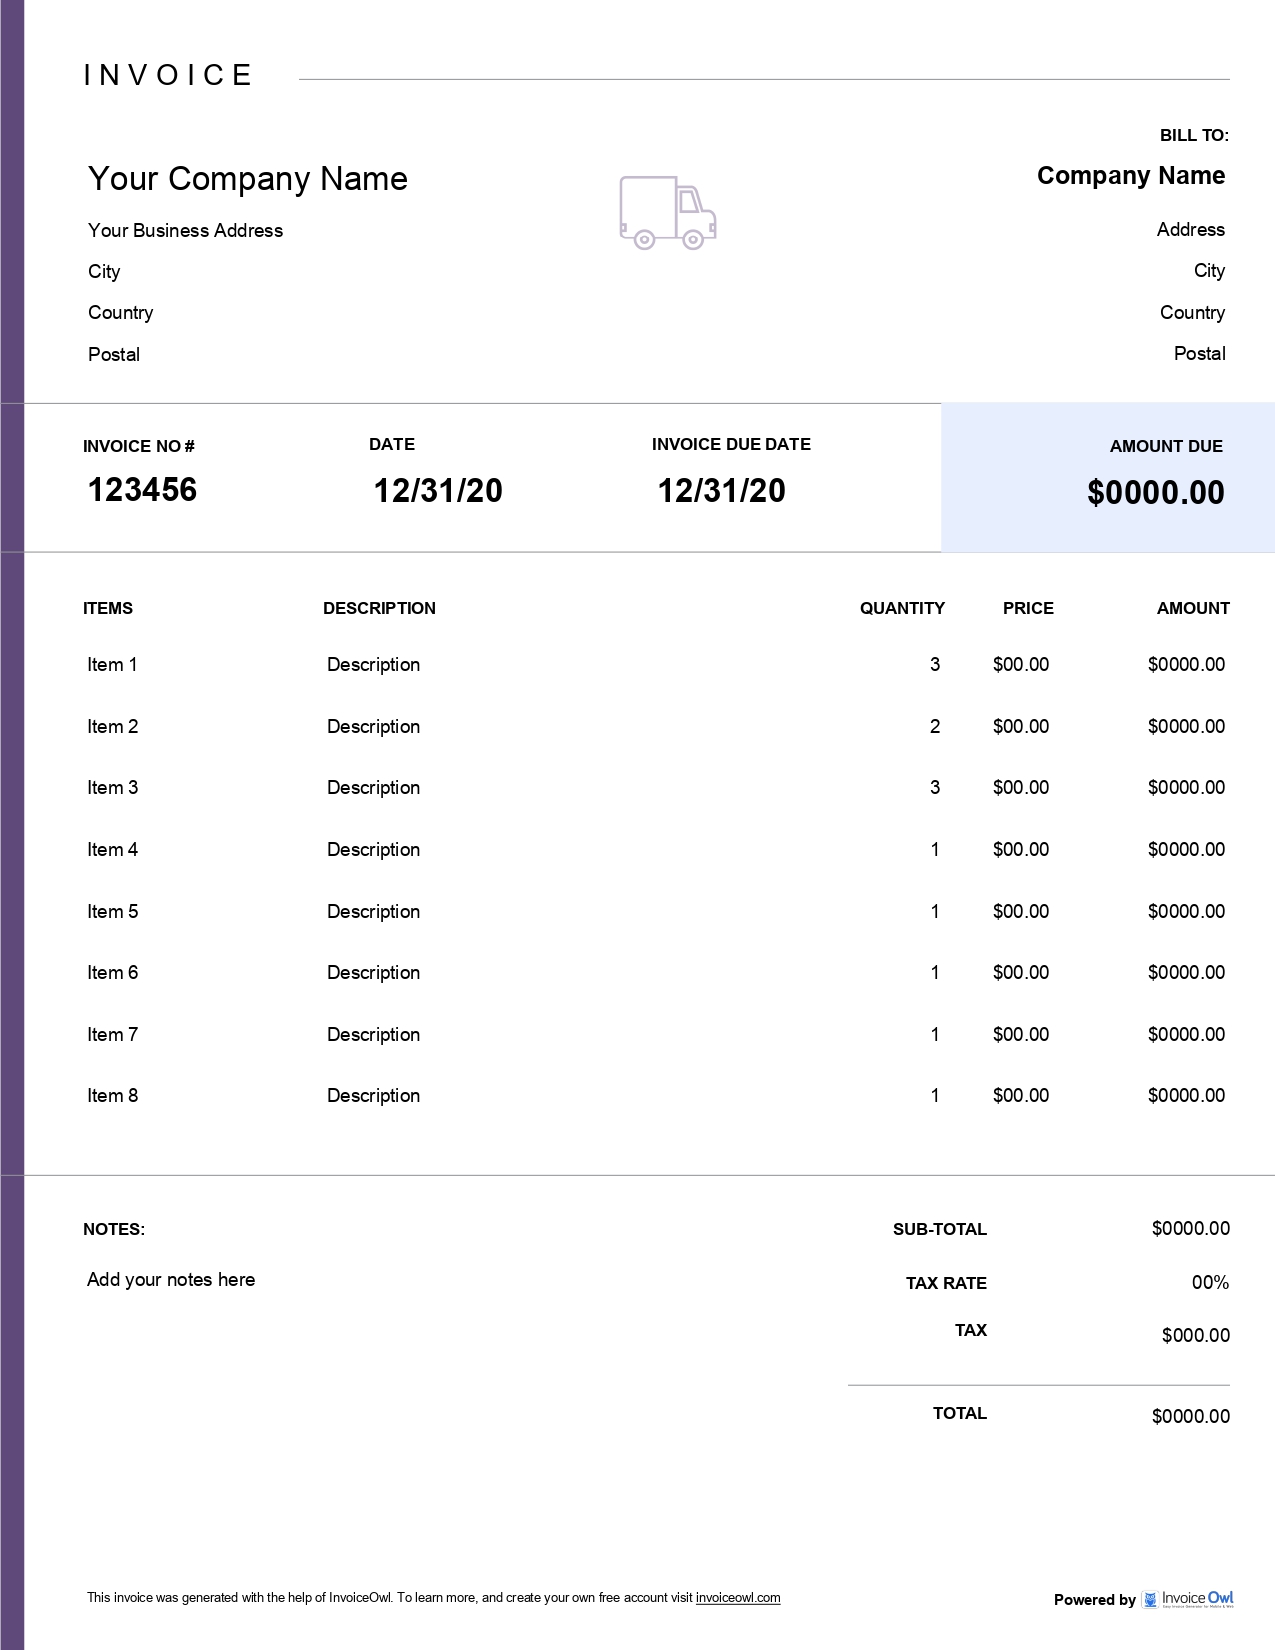 Short and long-distance invoice template